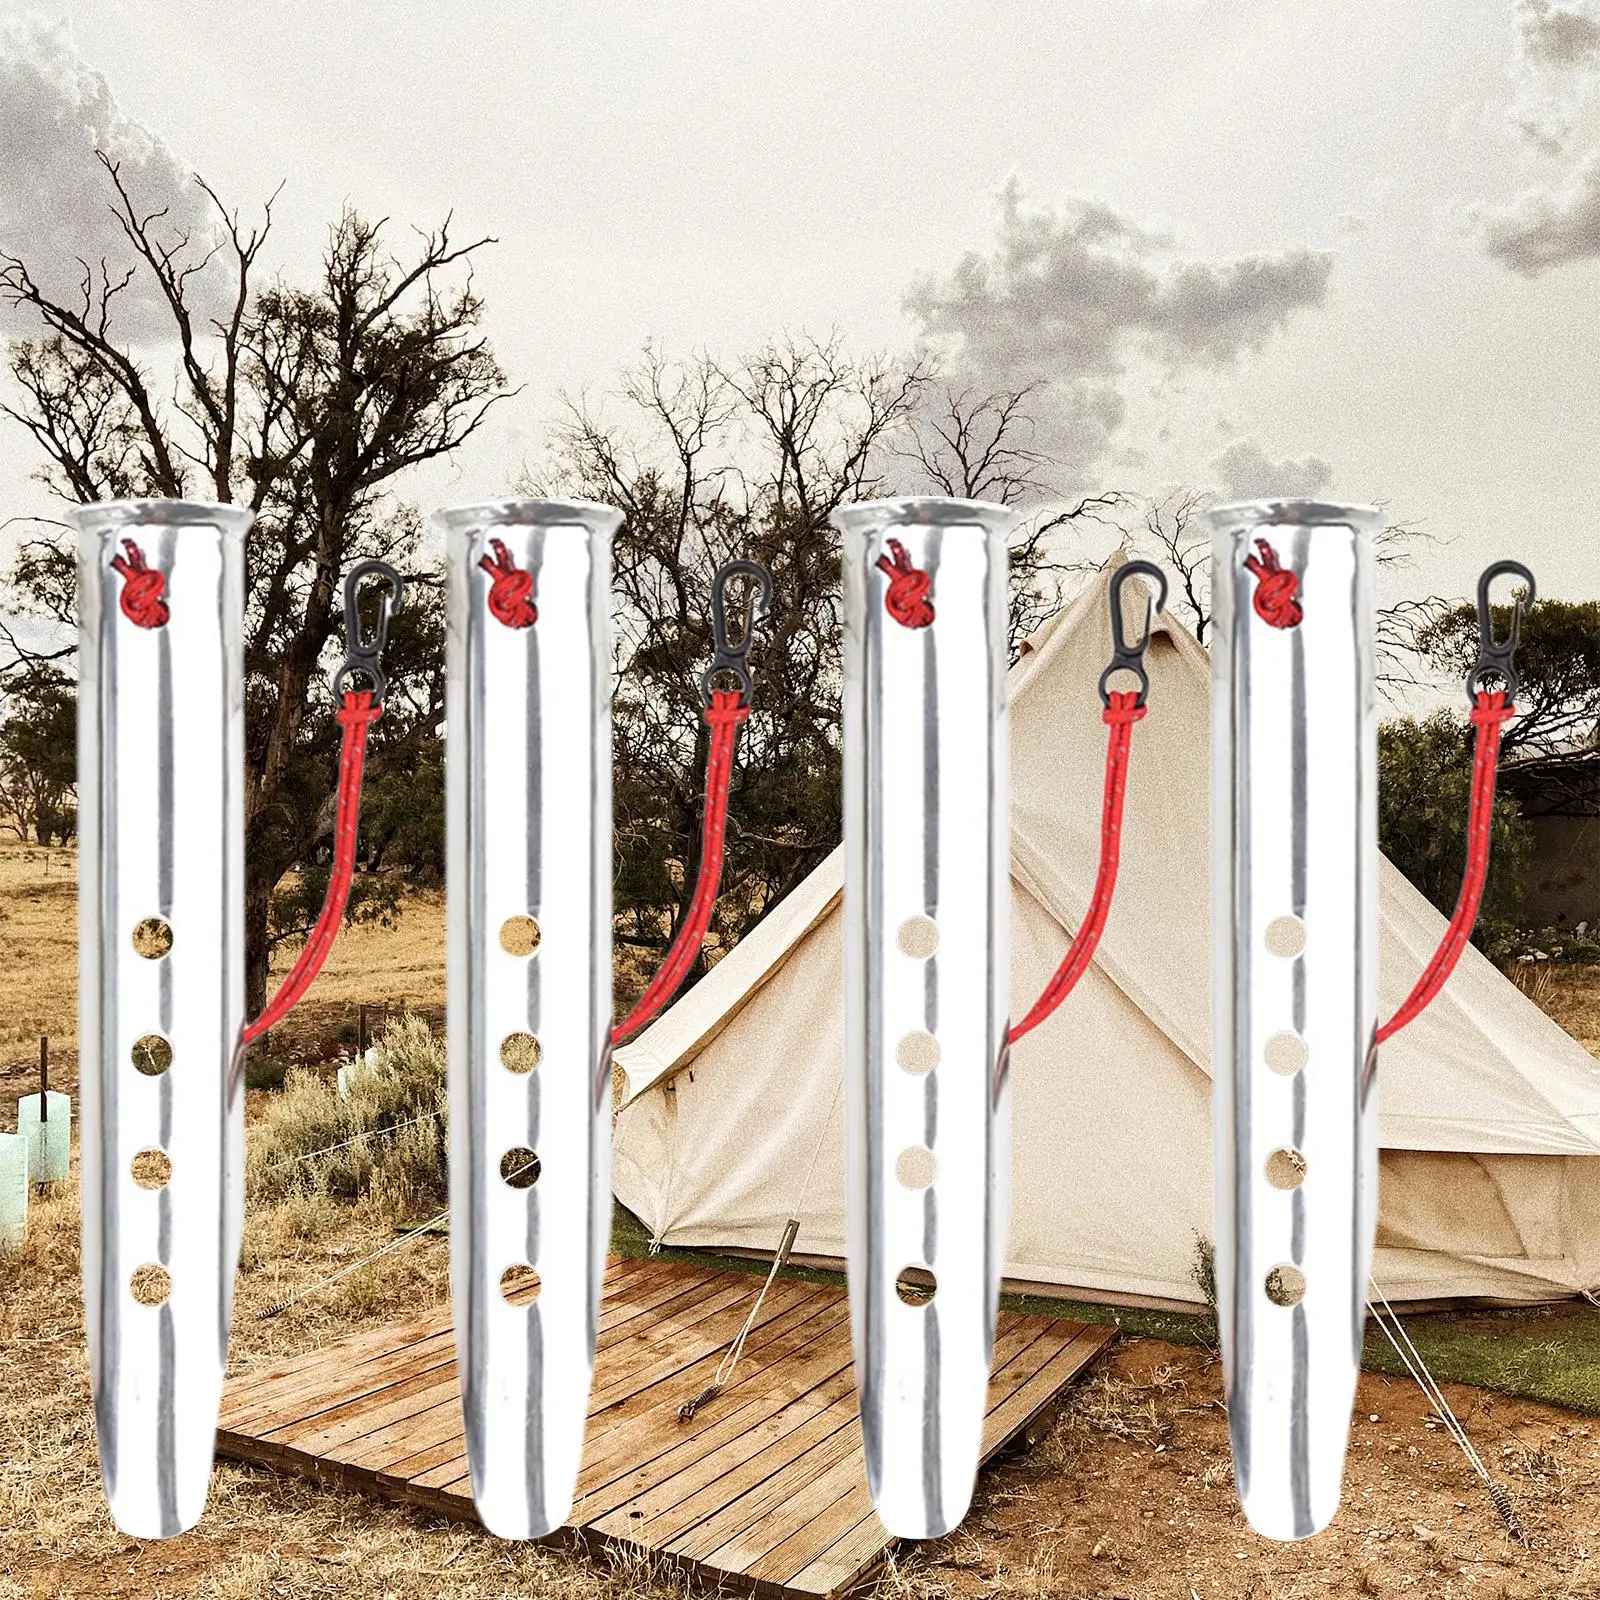 4x Metal Tent Pegs Snow Peg Ground Anchor Camping Loose Sand Camping Stakes for Canopy Hiking Backpacking Picnic Beach